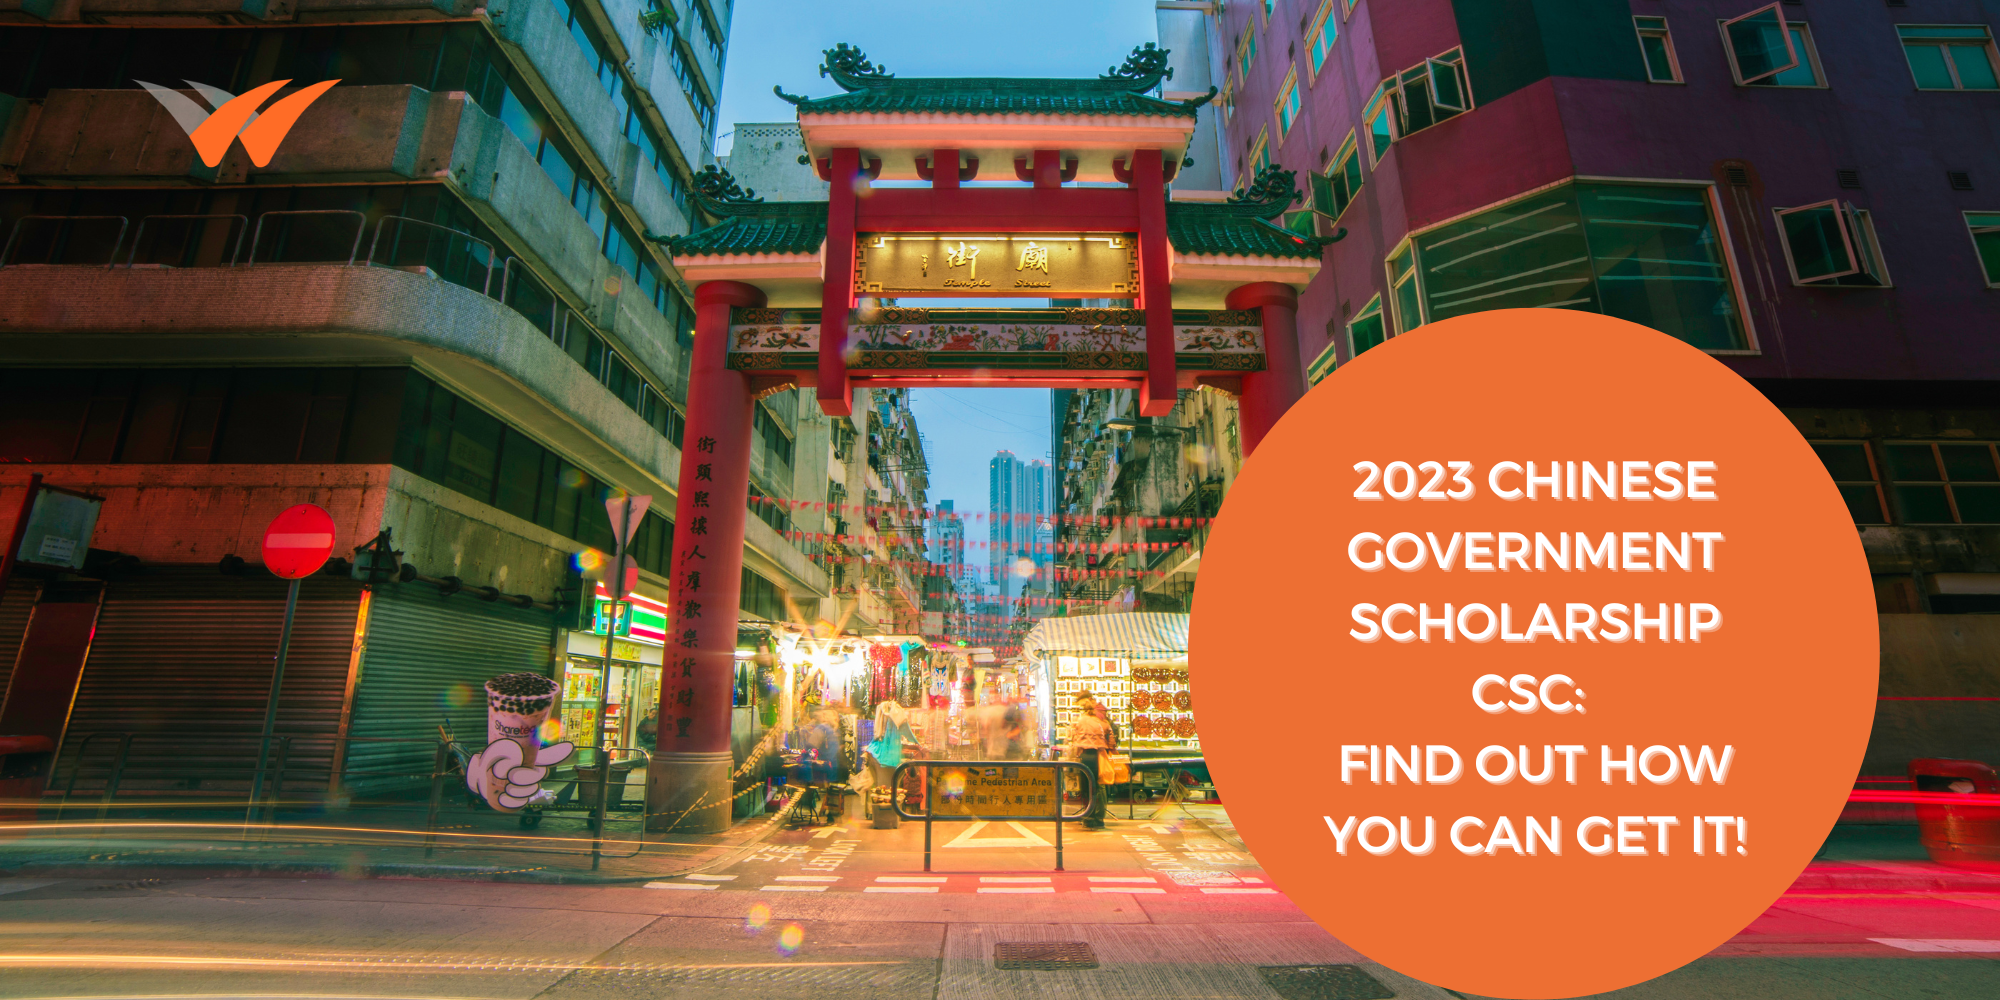 2023 Chinese Government Scholarship CSC: Find out how you can get it!